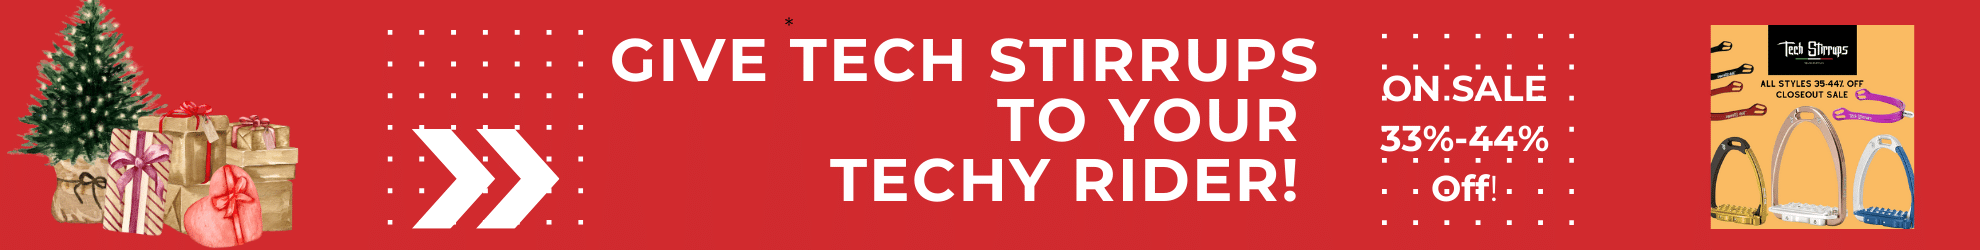 Tech Stirrups - Fo the Techy Person on your List